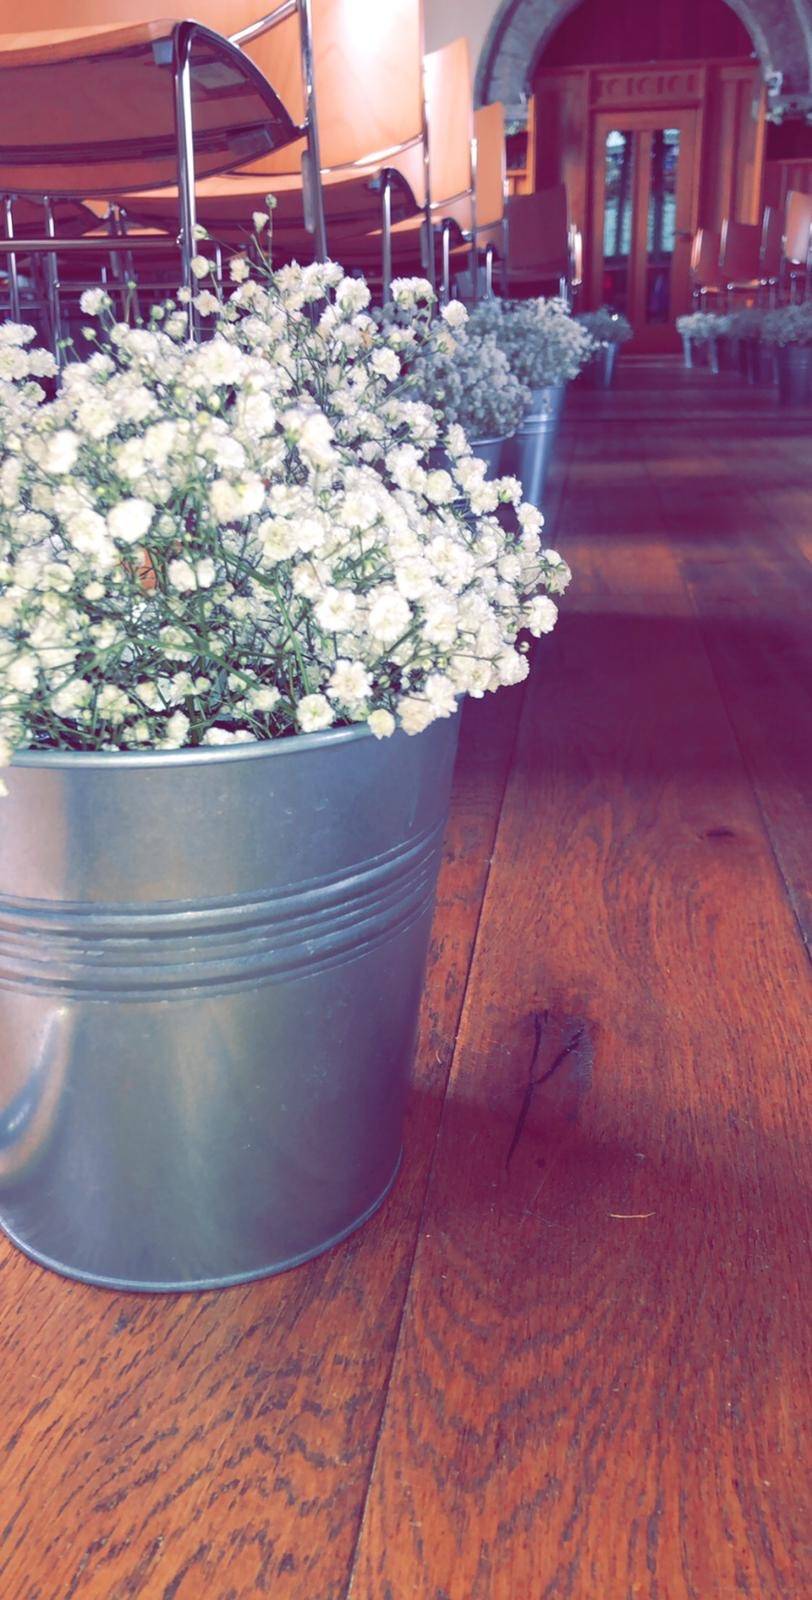 a metal bucket filled with white flowers on top of a wooden floor.